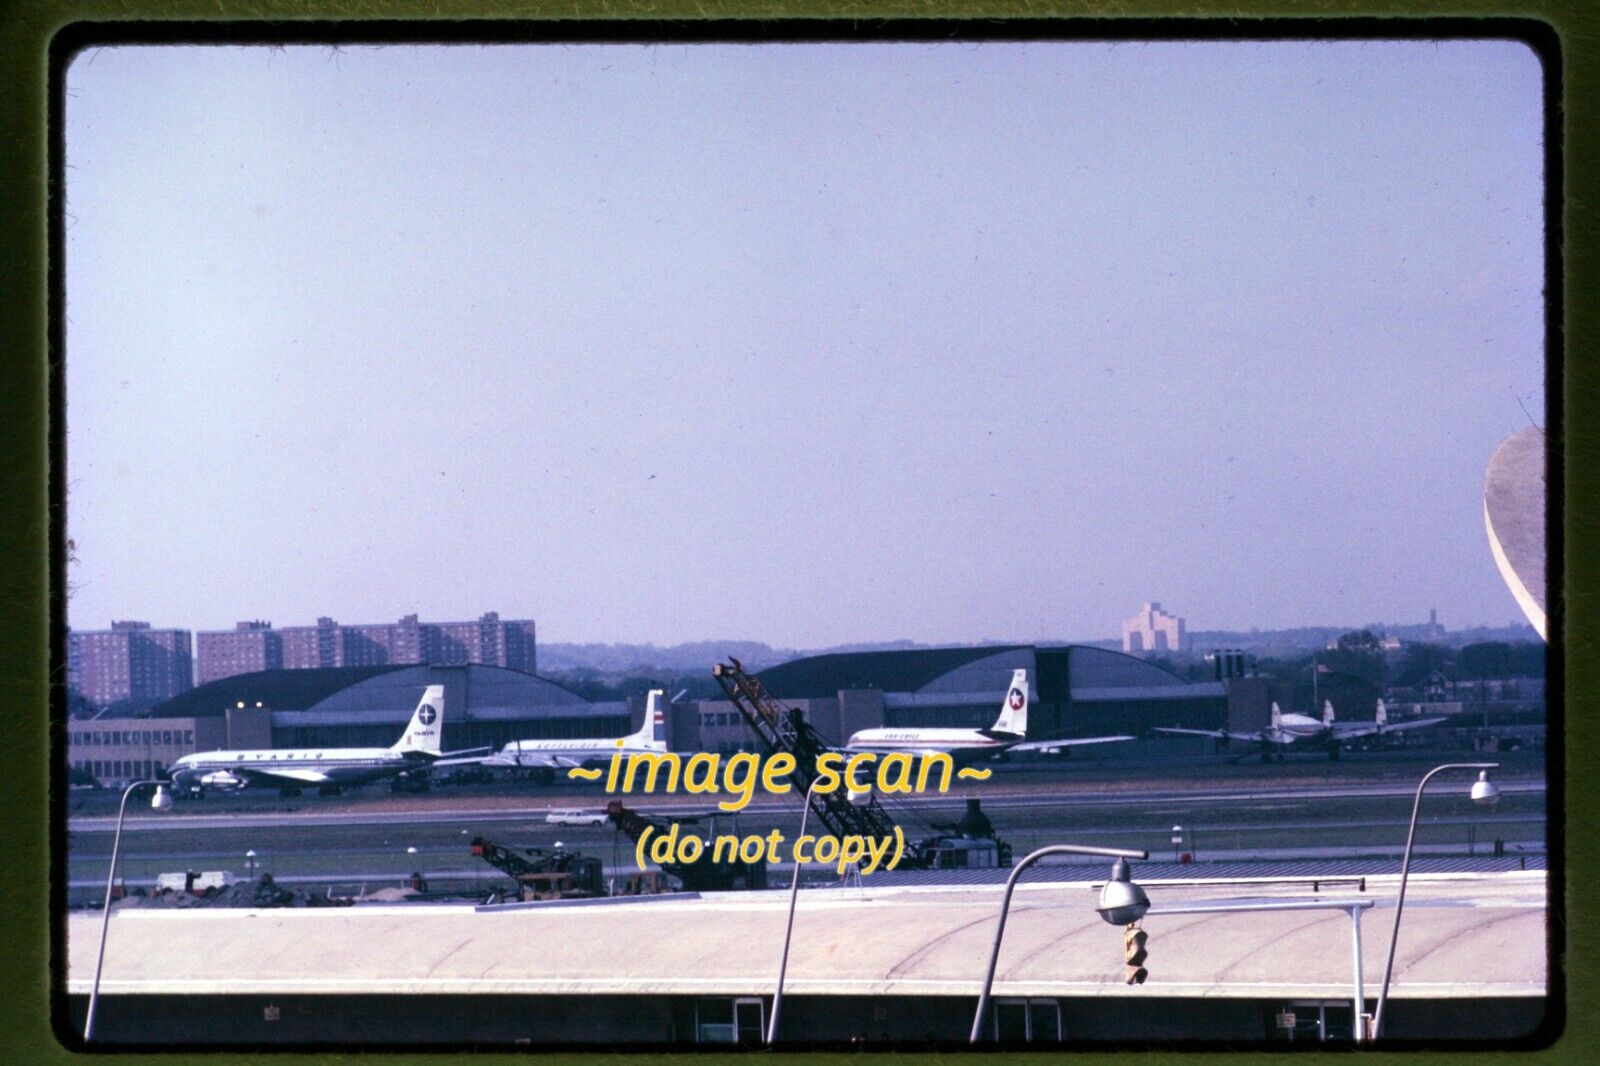 Varig Airlines Aircraft at an Airport in 1967, Kodachrome Slide aa 19-4a